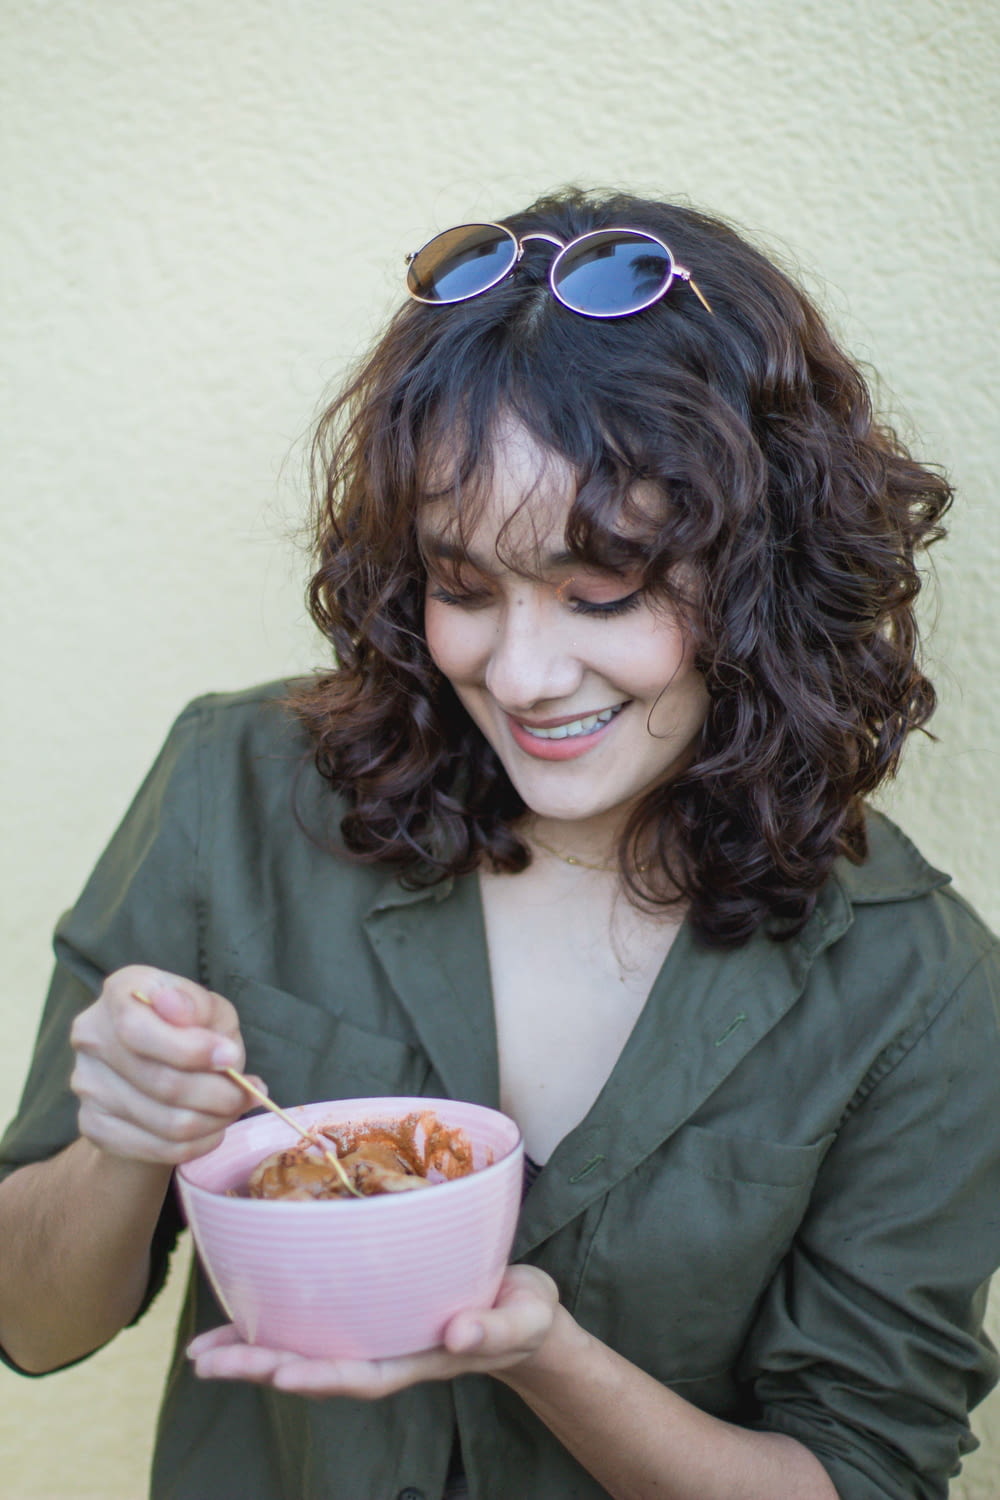 a woman in a green shirt is holding a bowl of food